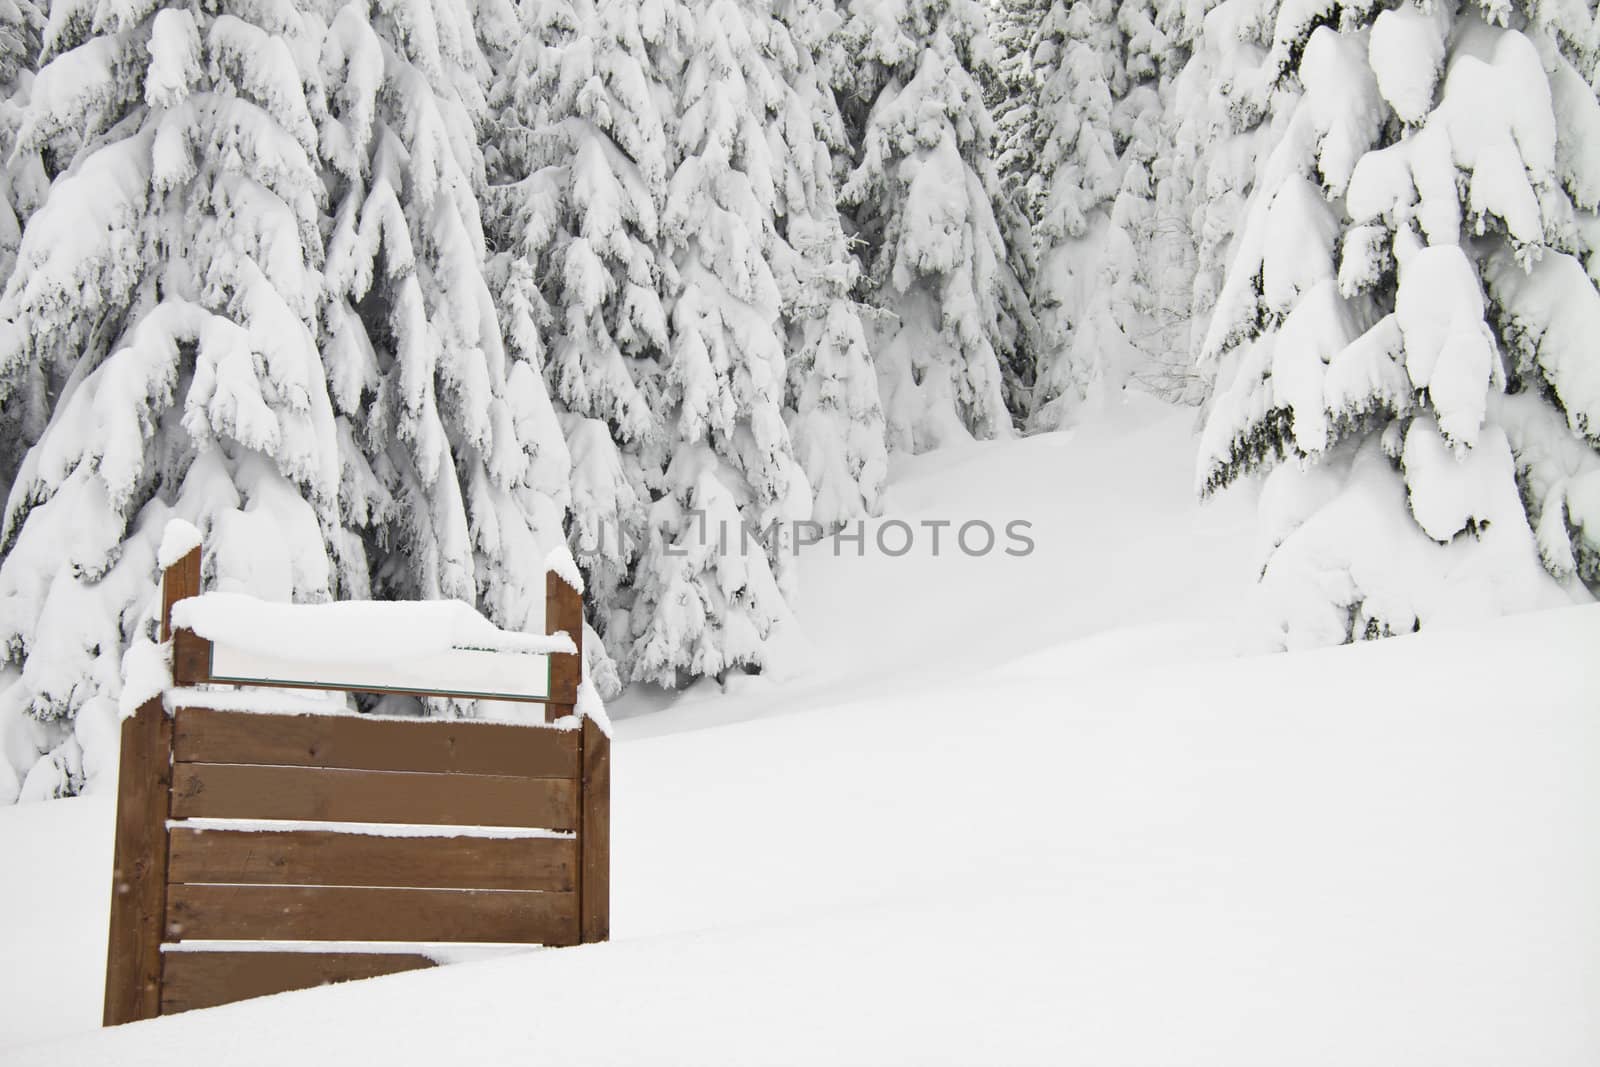 Fir trees with lots of snow and a sign on left, horizontal by Lamarinx